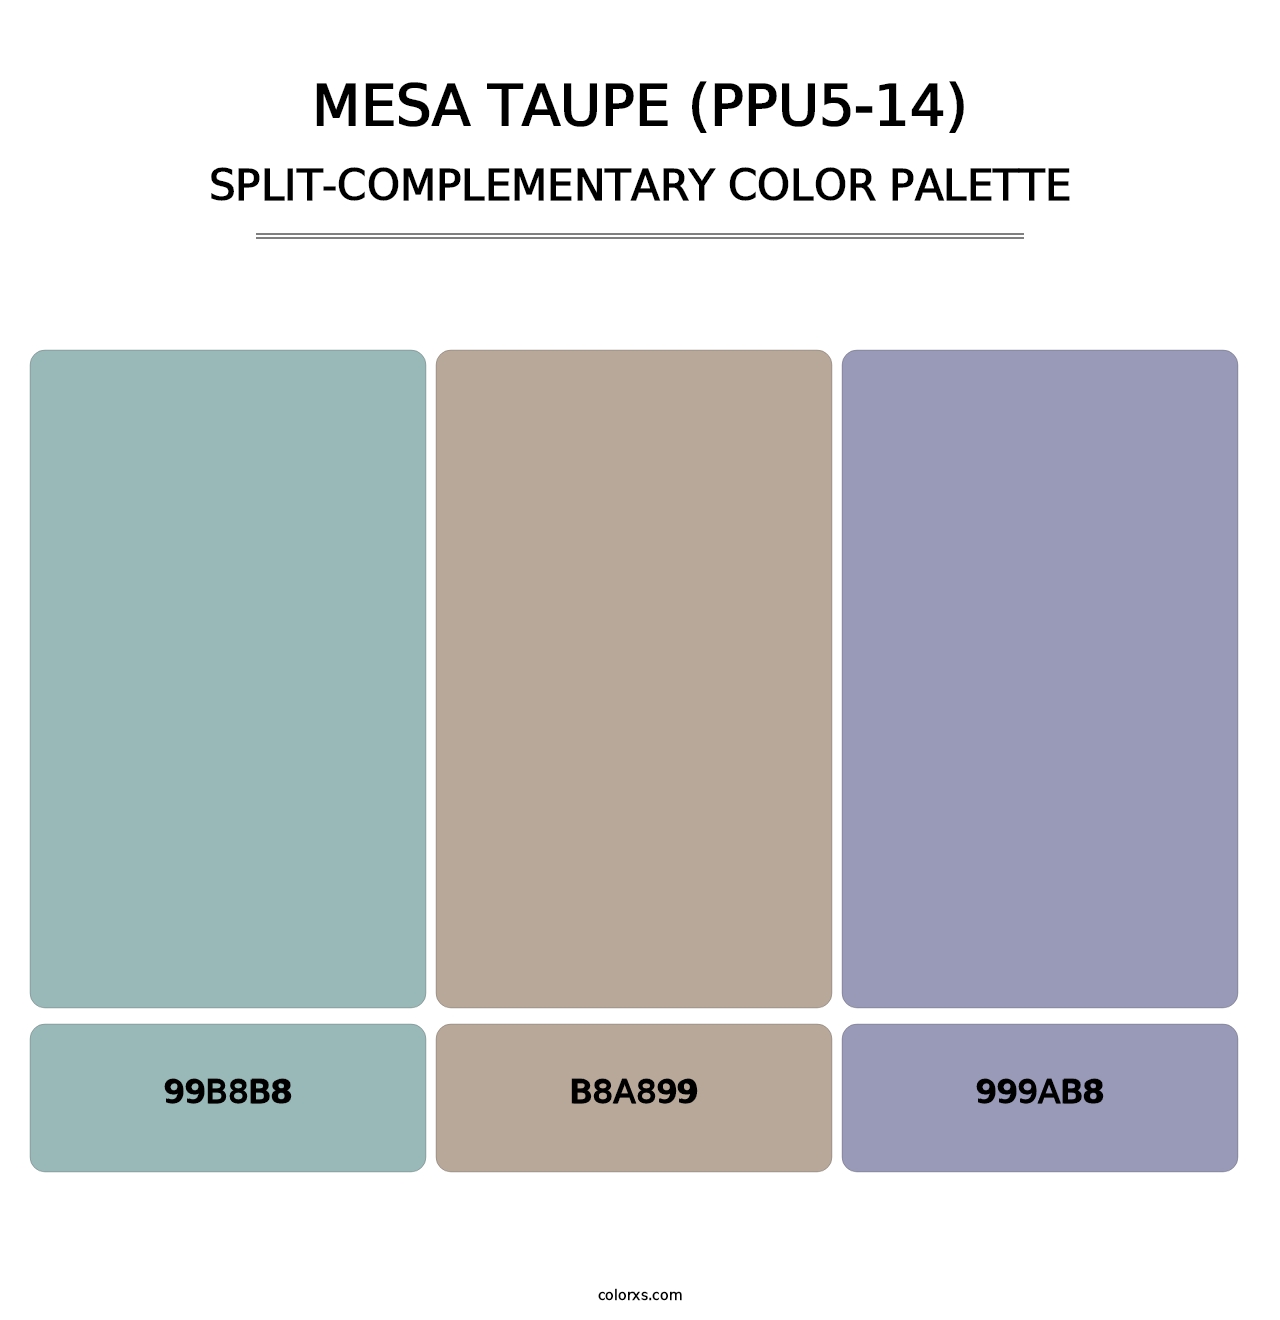 Mesa Taupe (PPU5-14) - Split-Complementary Color Palette